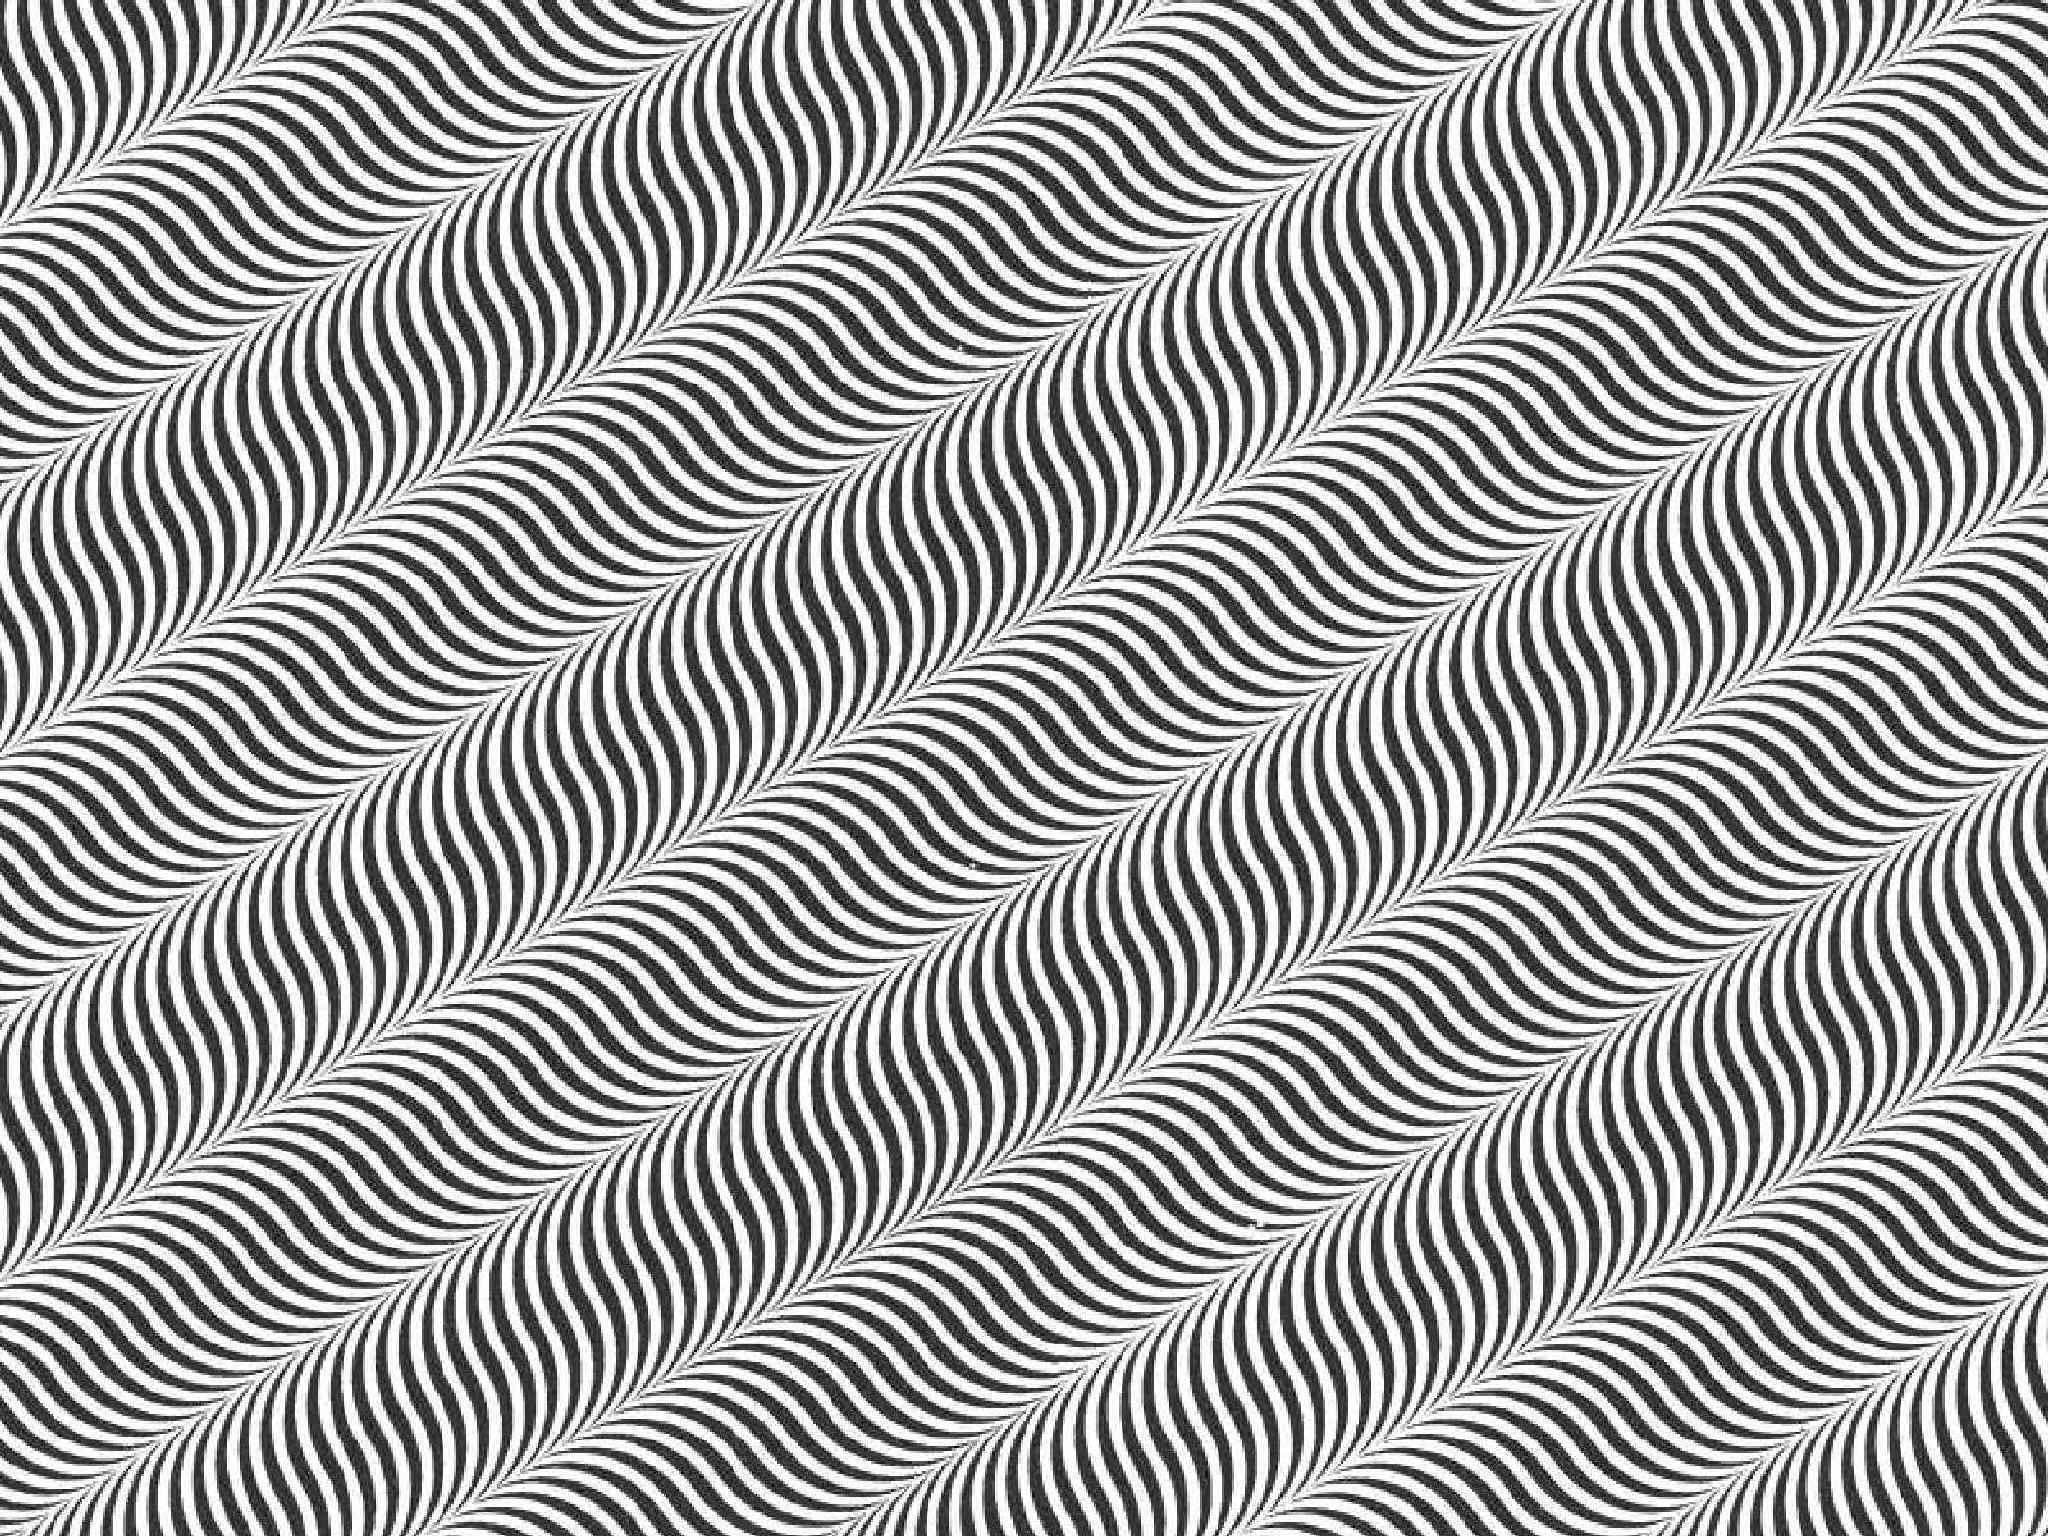 Optical illusion - (#86692) - High Quality and Resolution ...